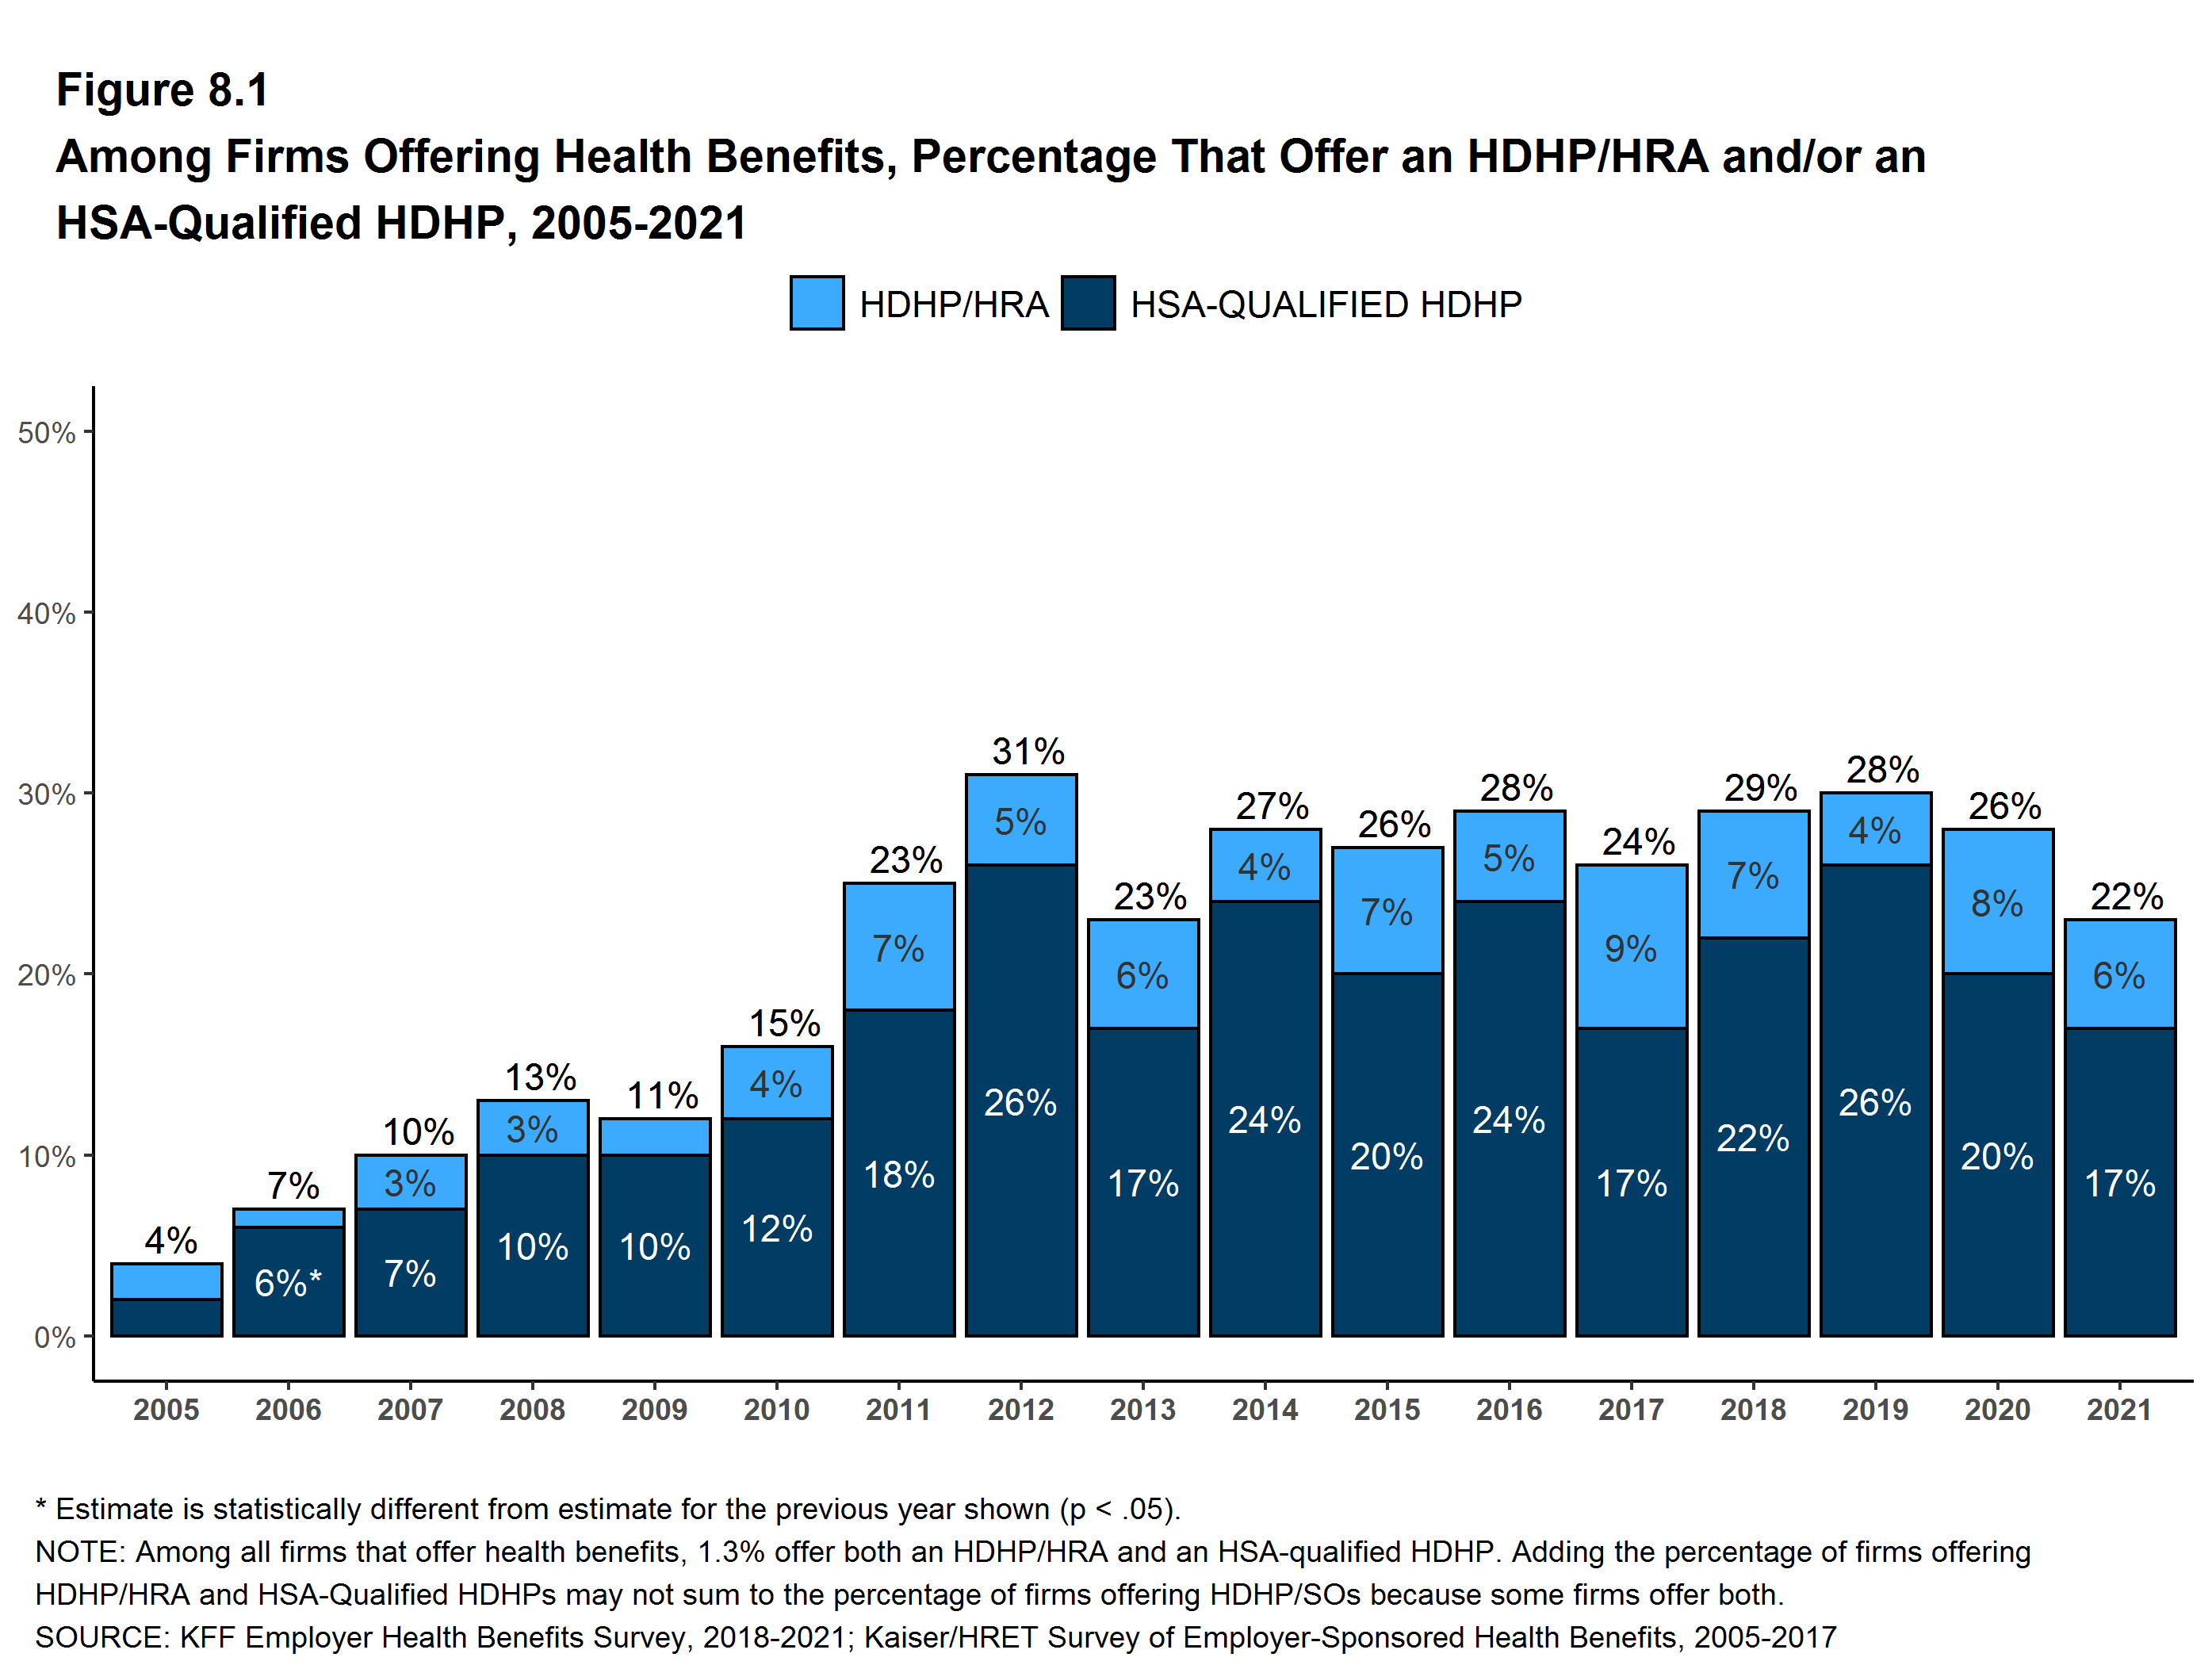 Among Firms Offering Health Benefits, Percentage That Offer an HDHP/HRA